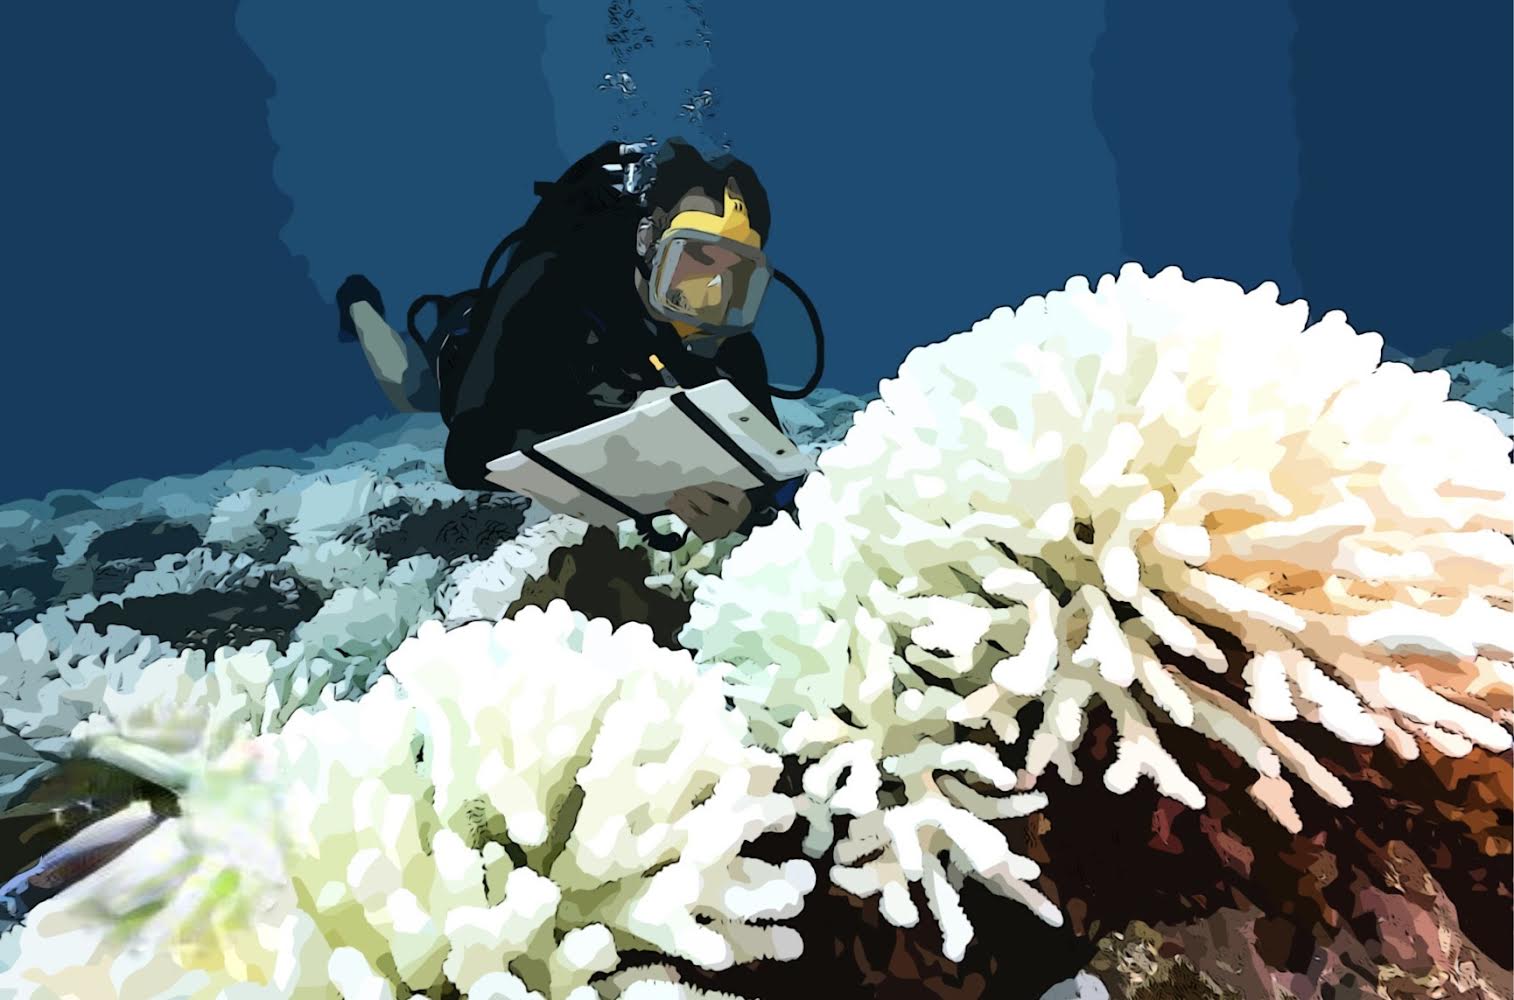 Coral blanching is occurring in many reefs in the Florida Bay due to a significant increase in ocean temperatures.